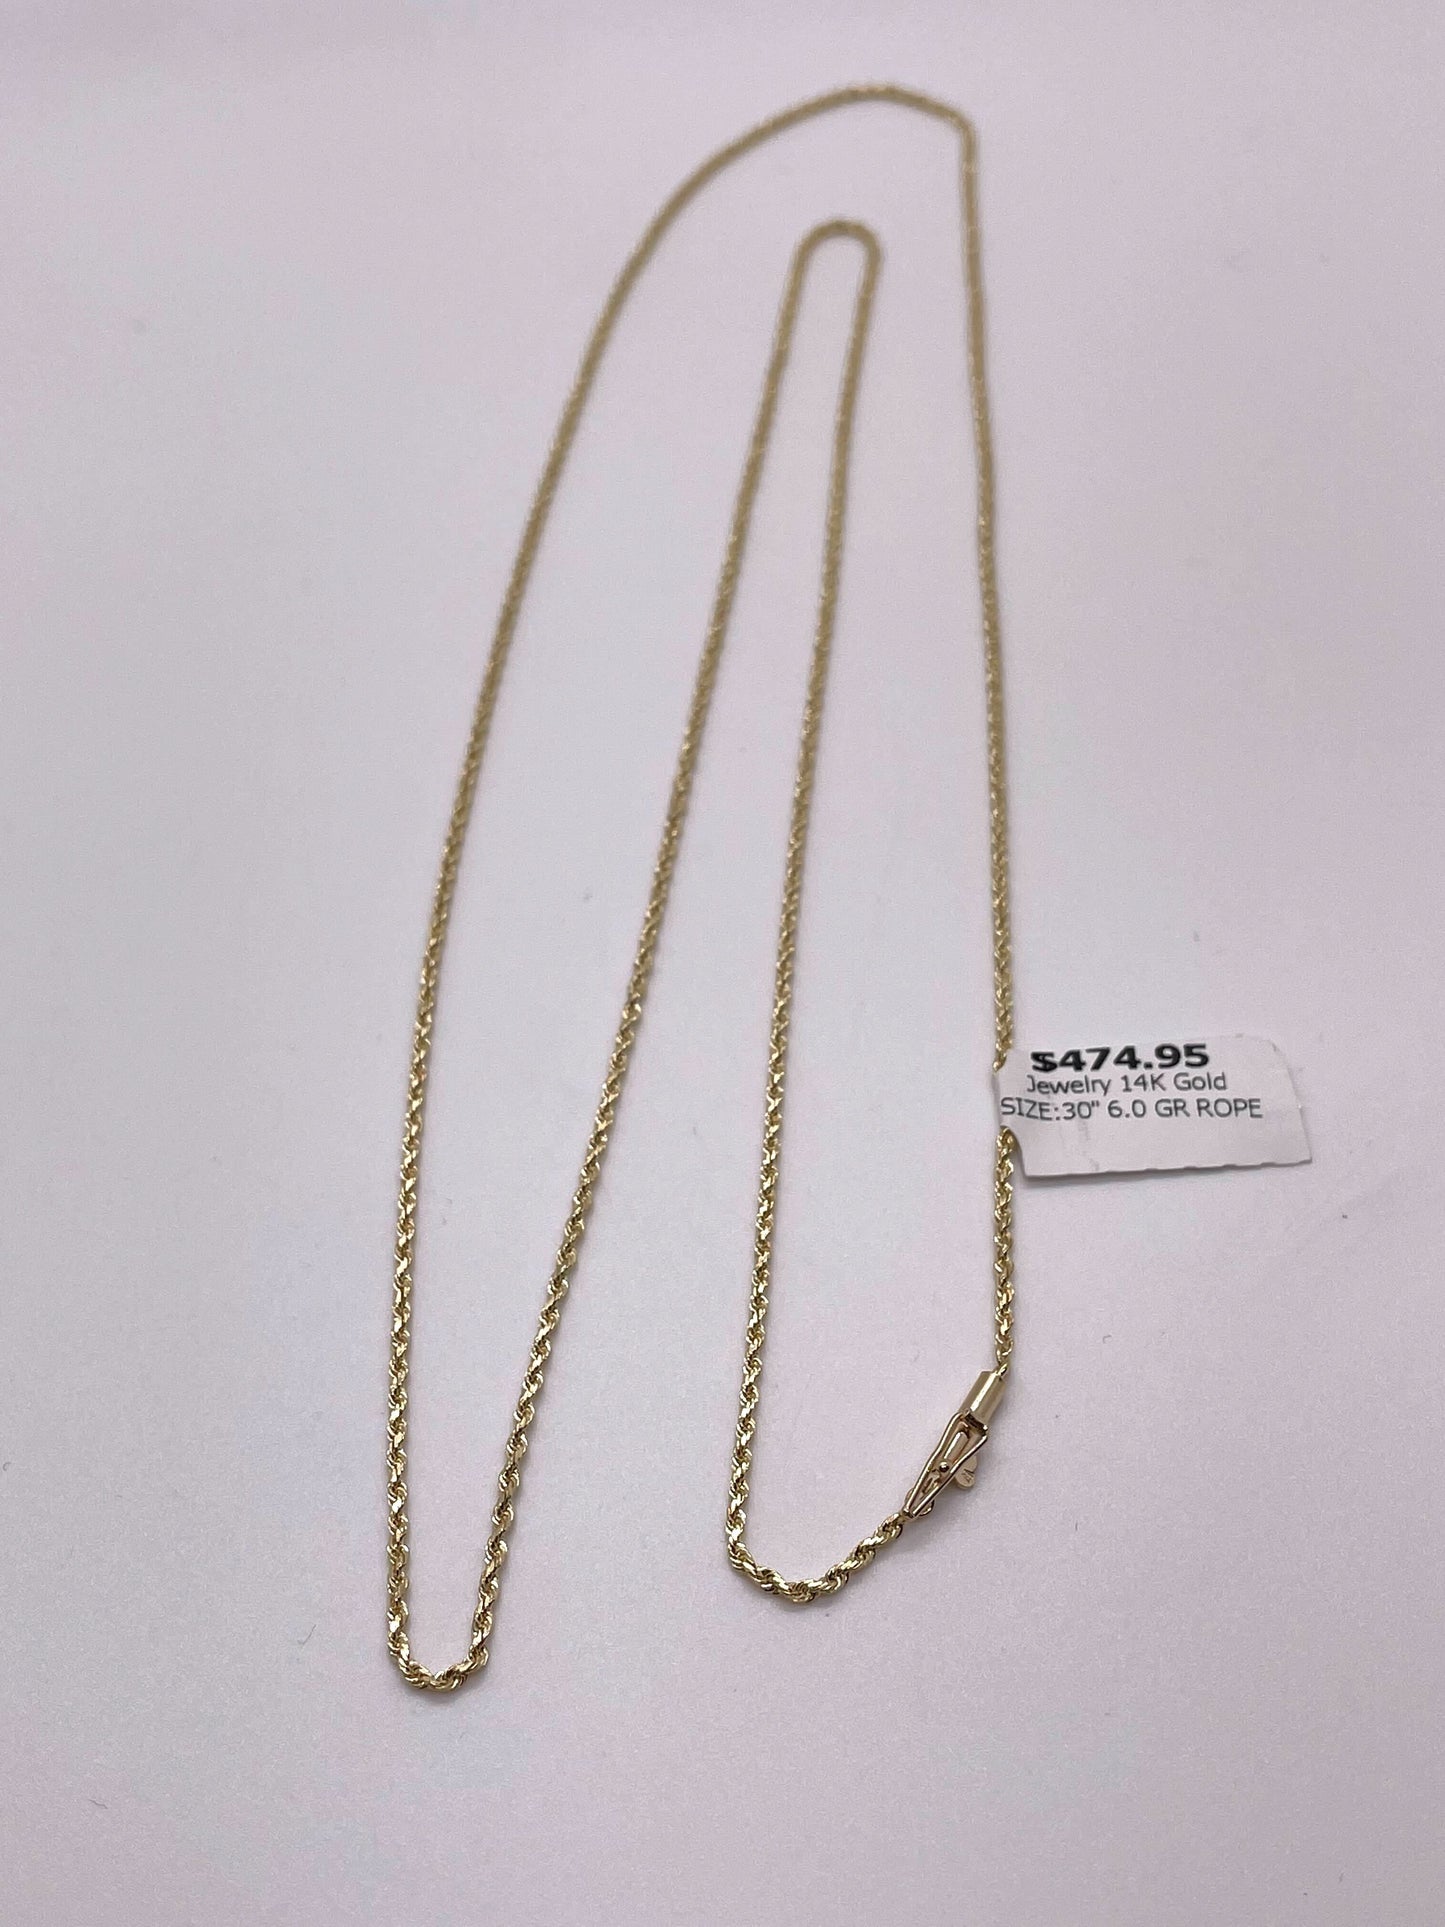 14k Yellow Gold Solid Rope Chain, 30 inches - 6.0g